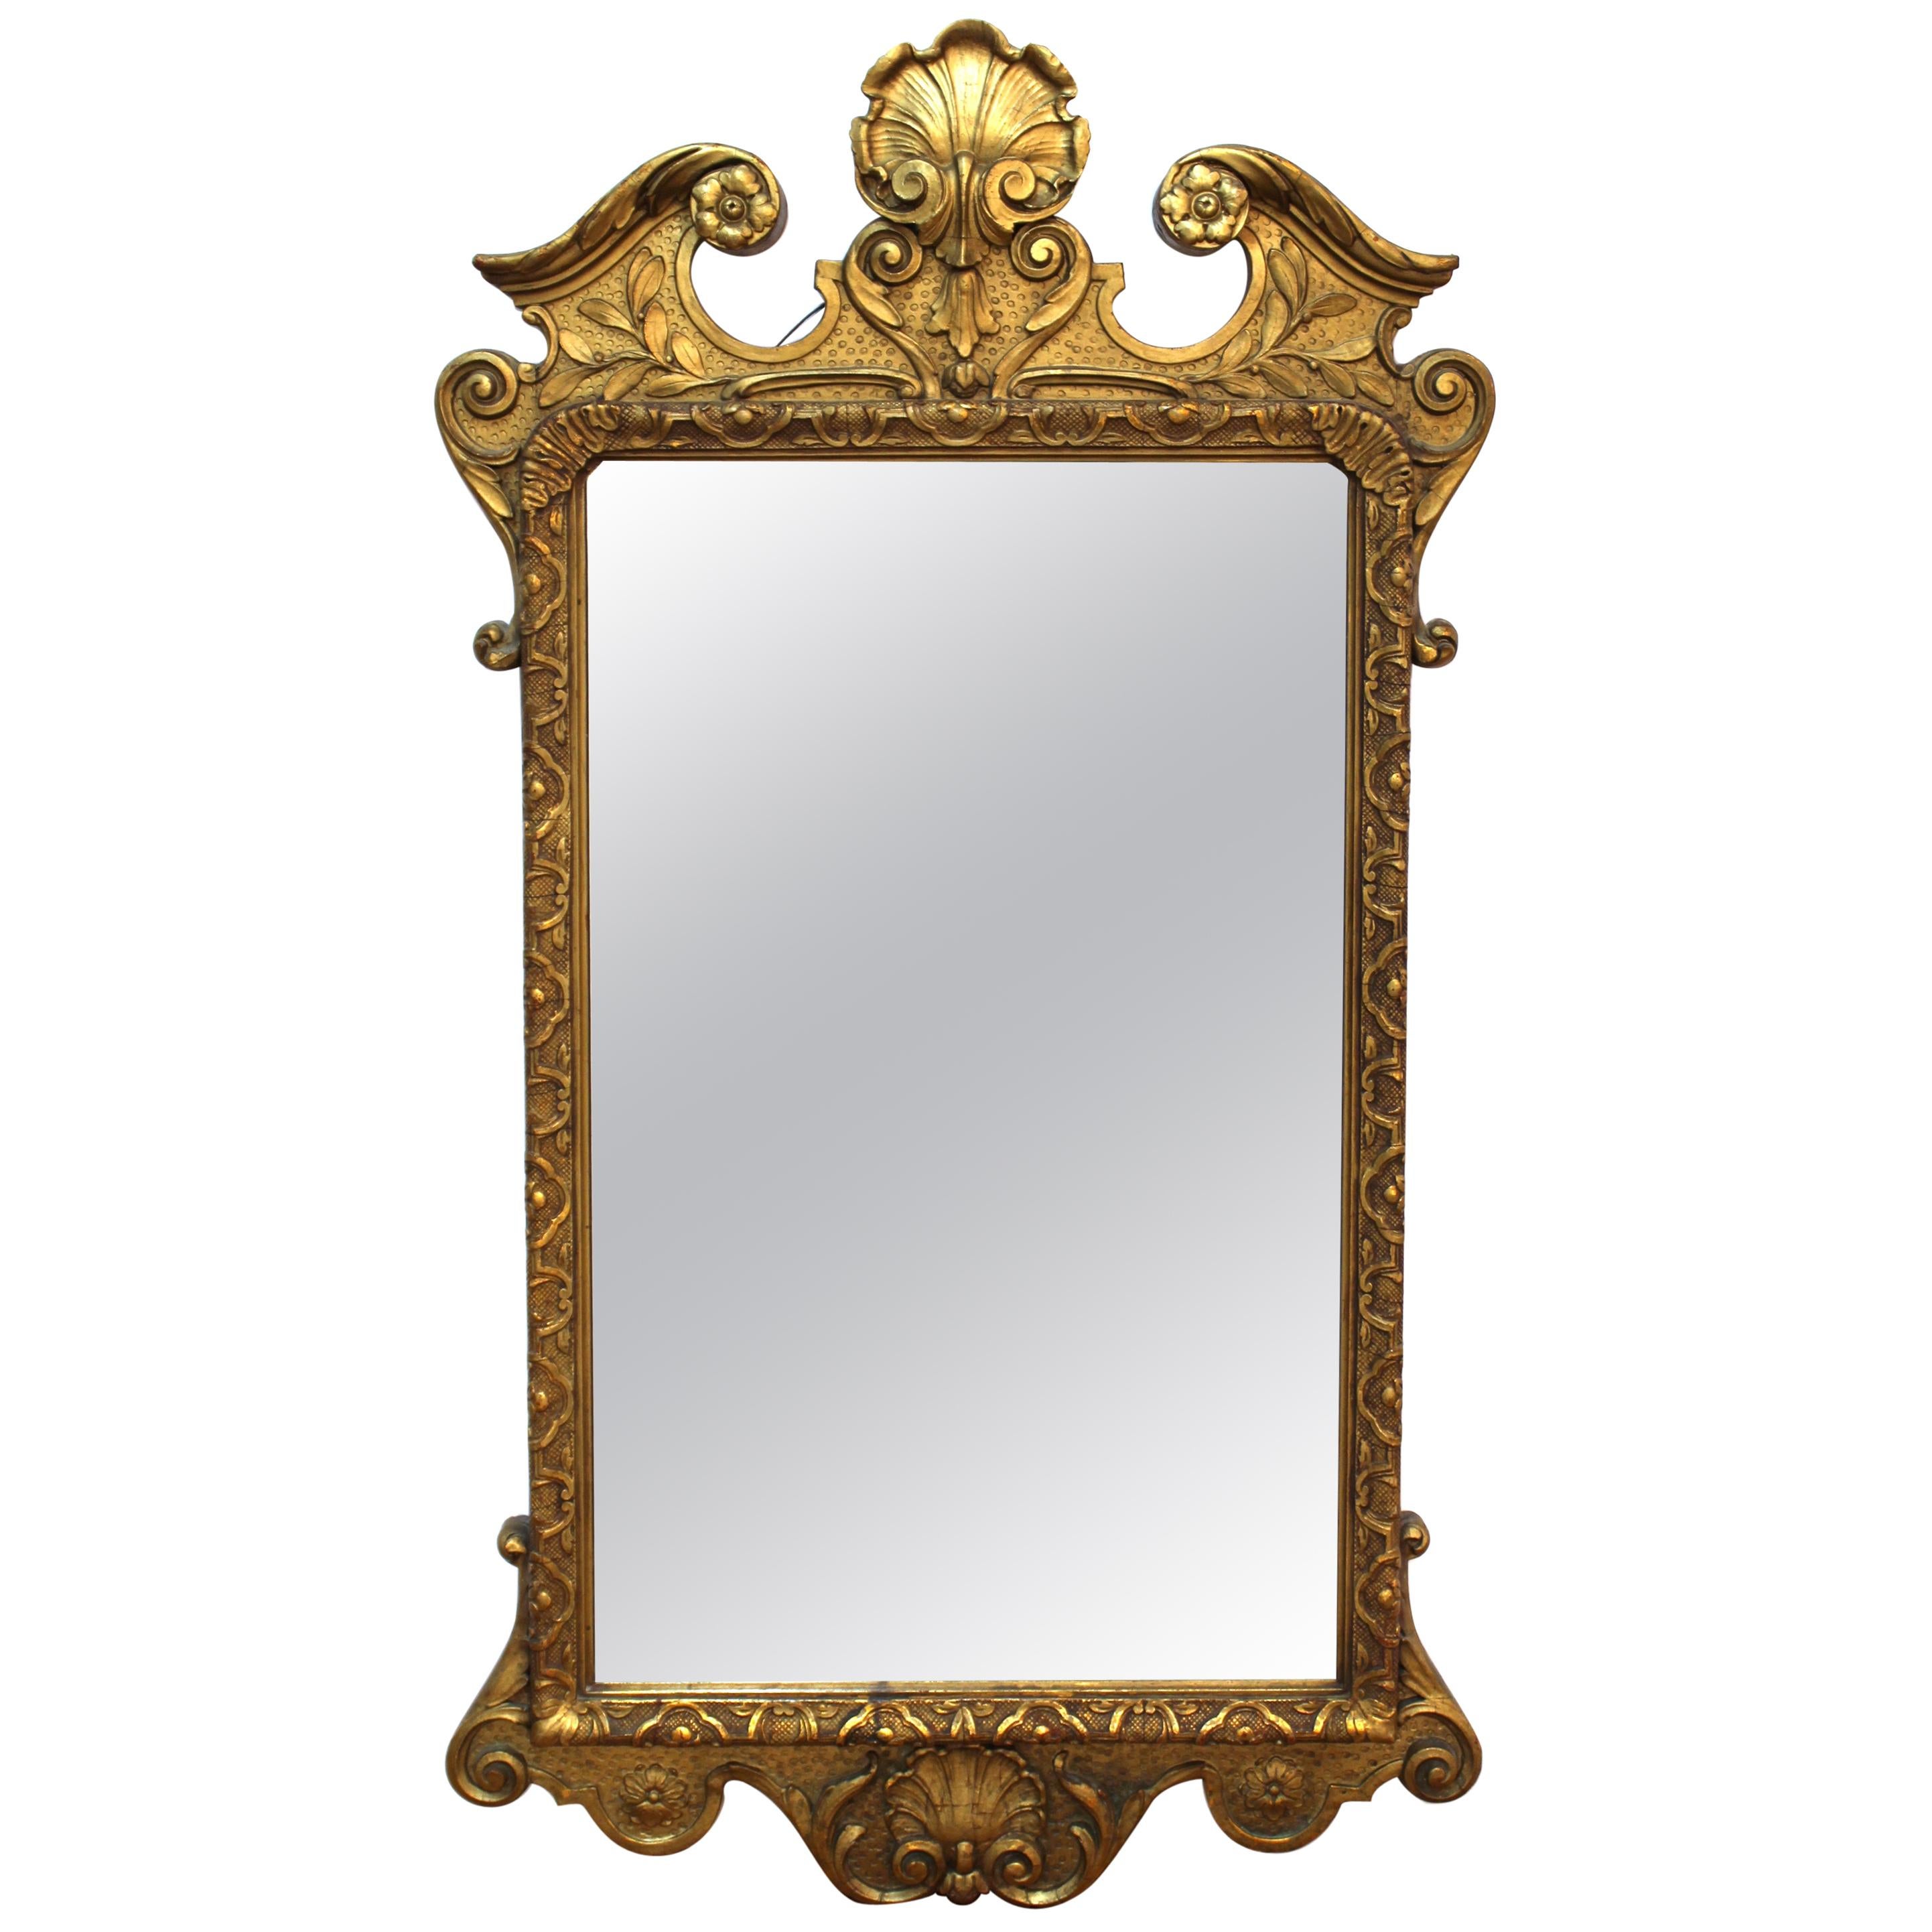 Baroque Style Giltwood Wall Mirror